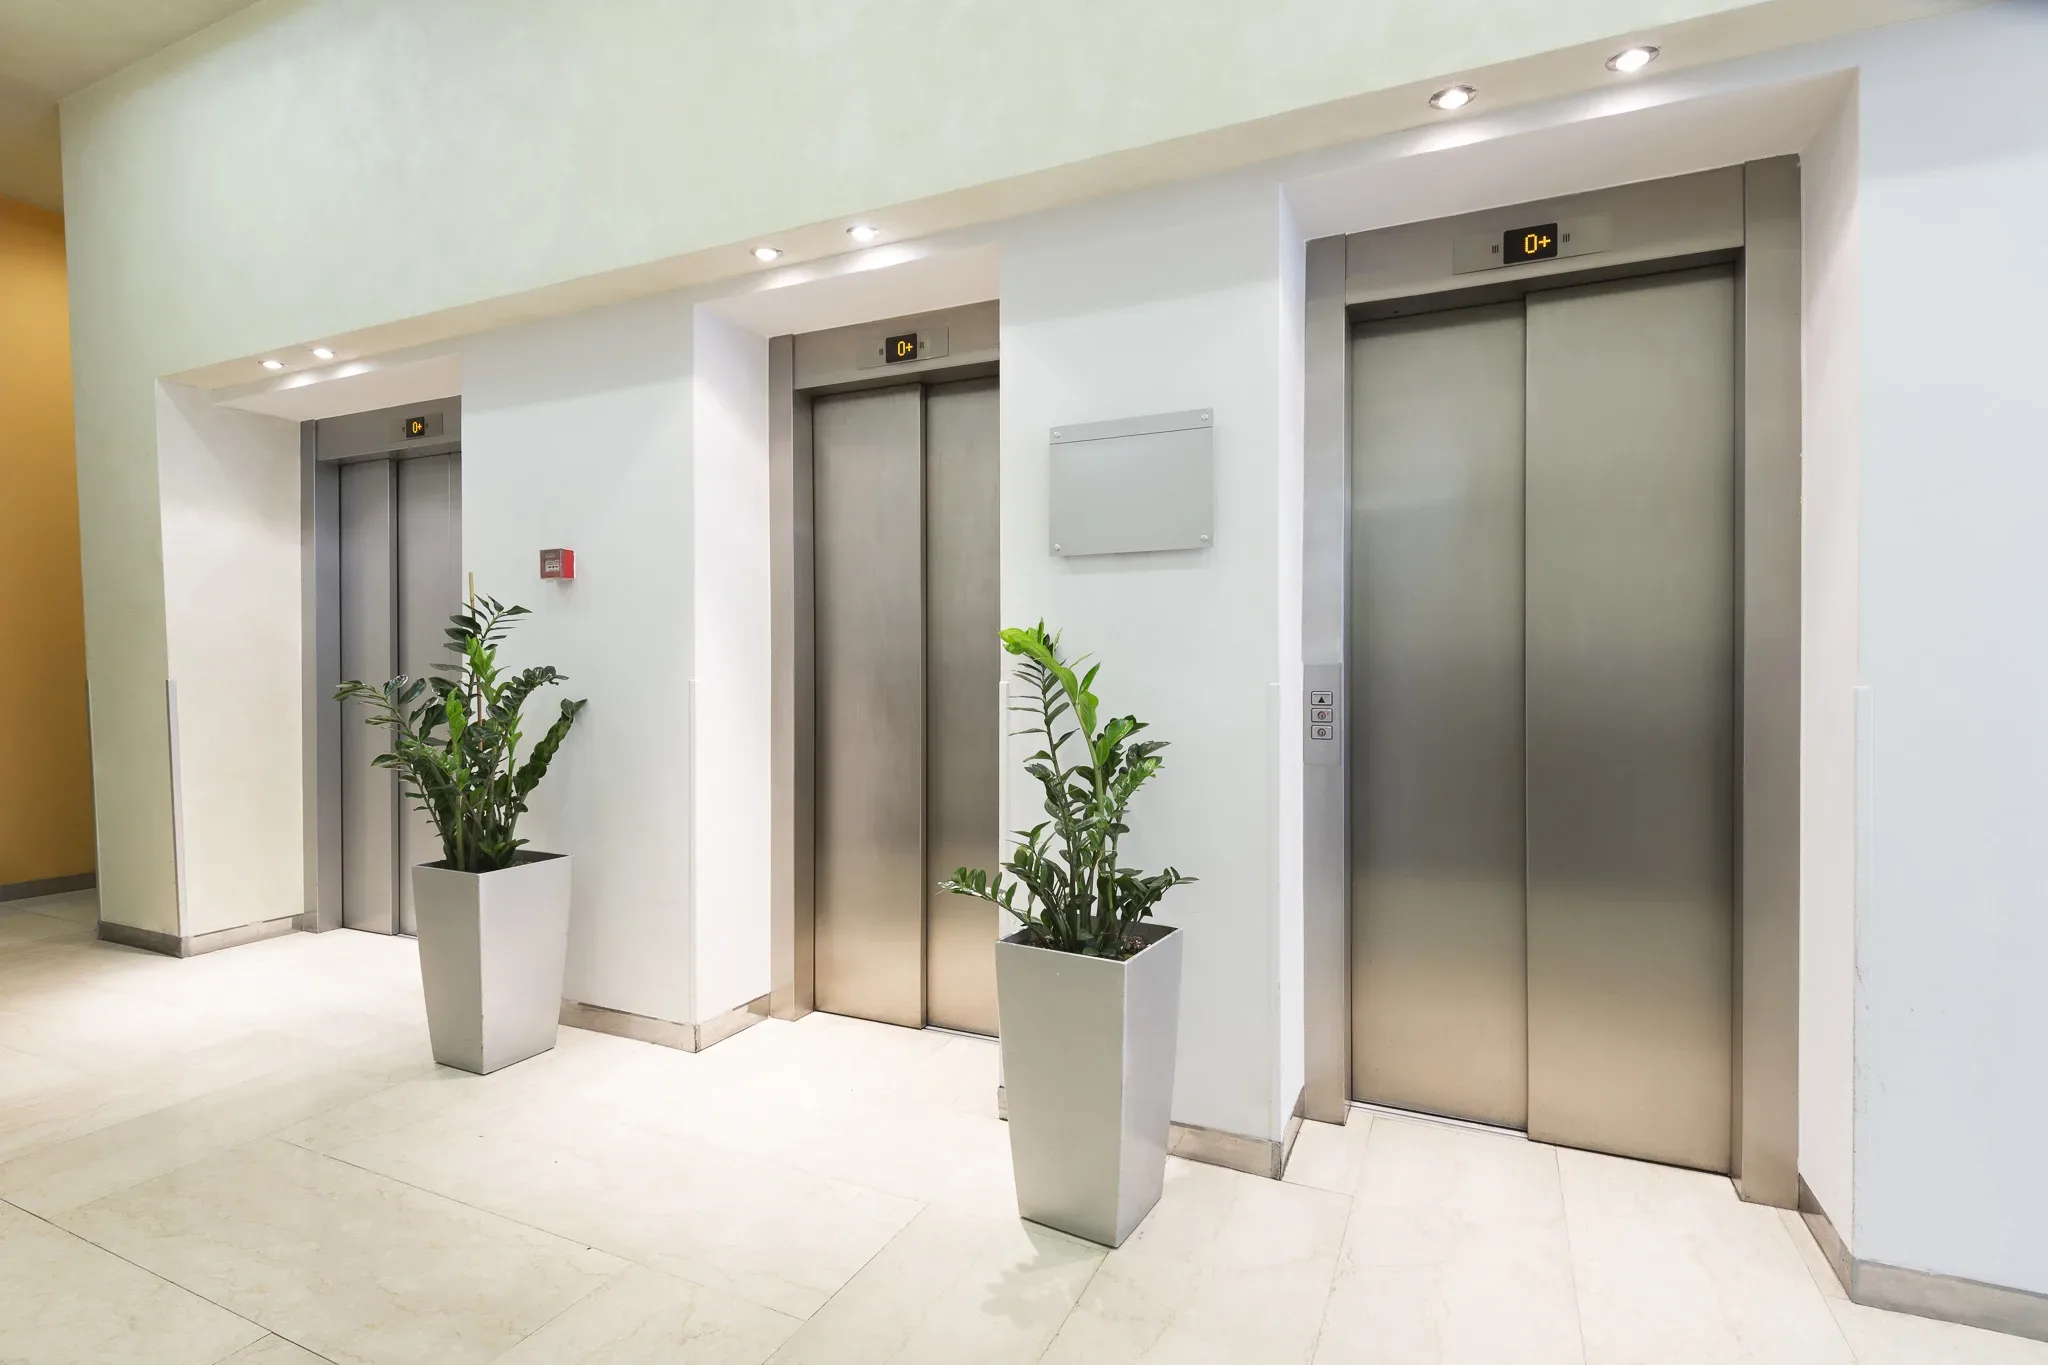 A group of elevators in an office building.